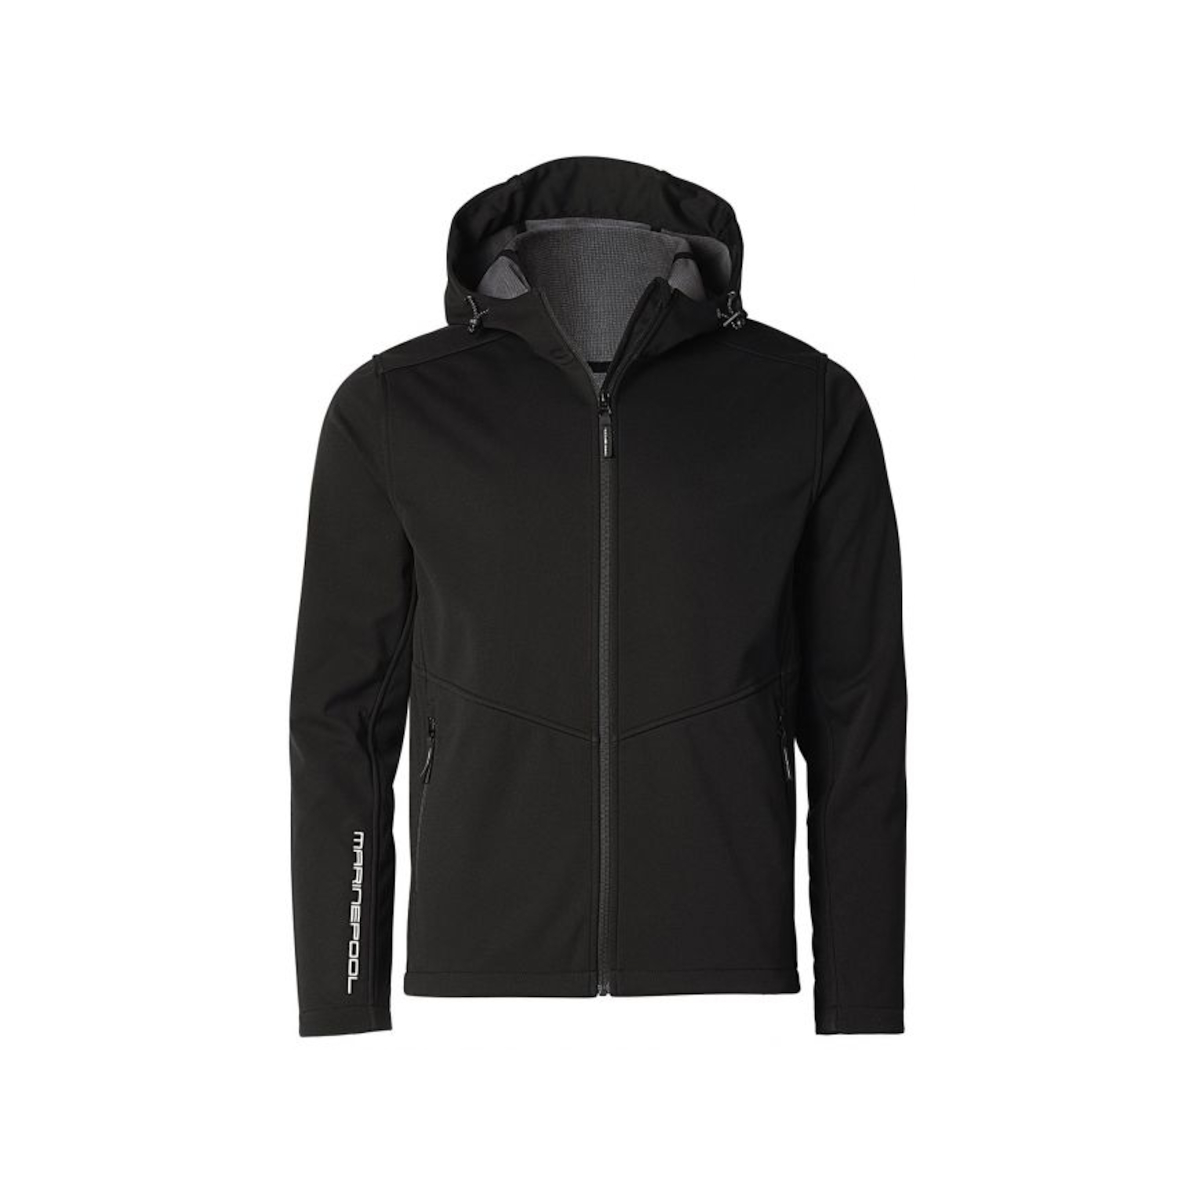 Marinepool Newhaven veste Softshell homme noir, taille M